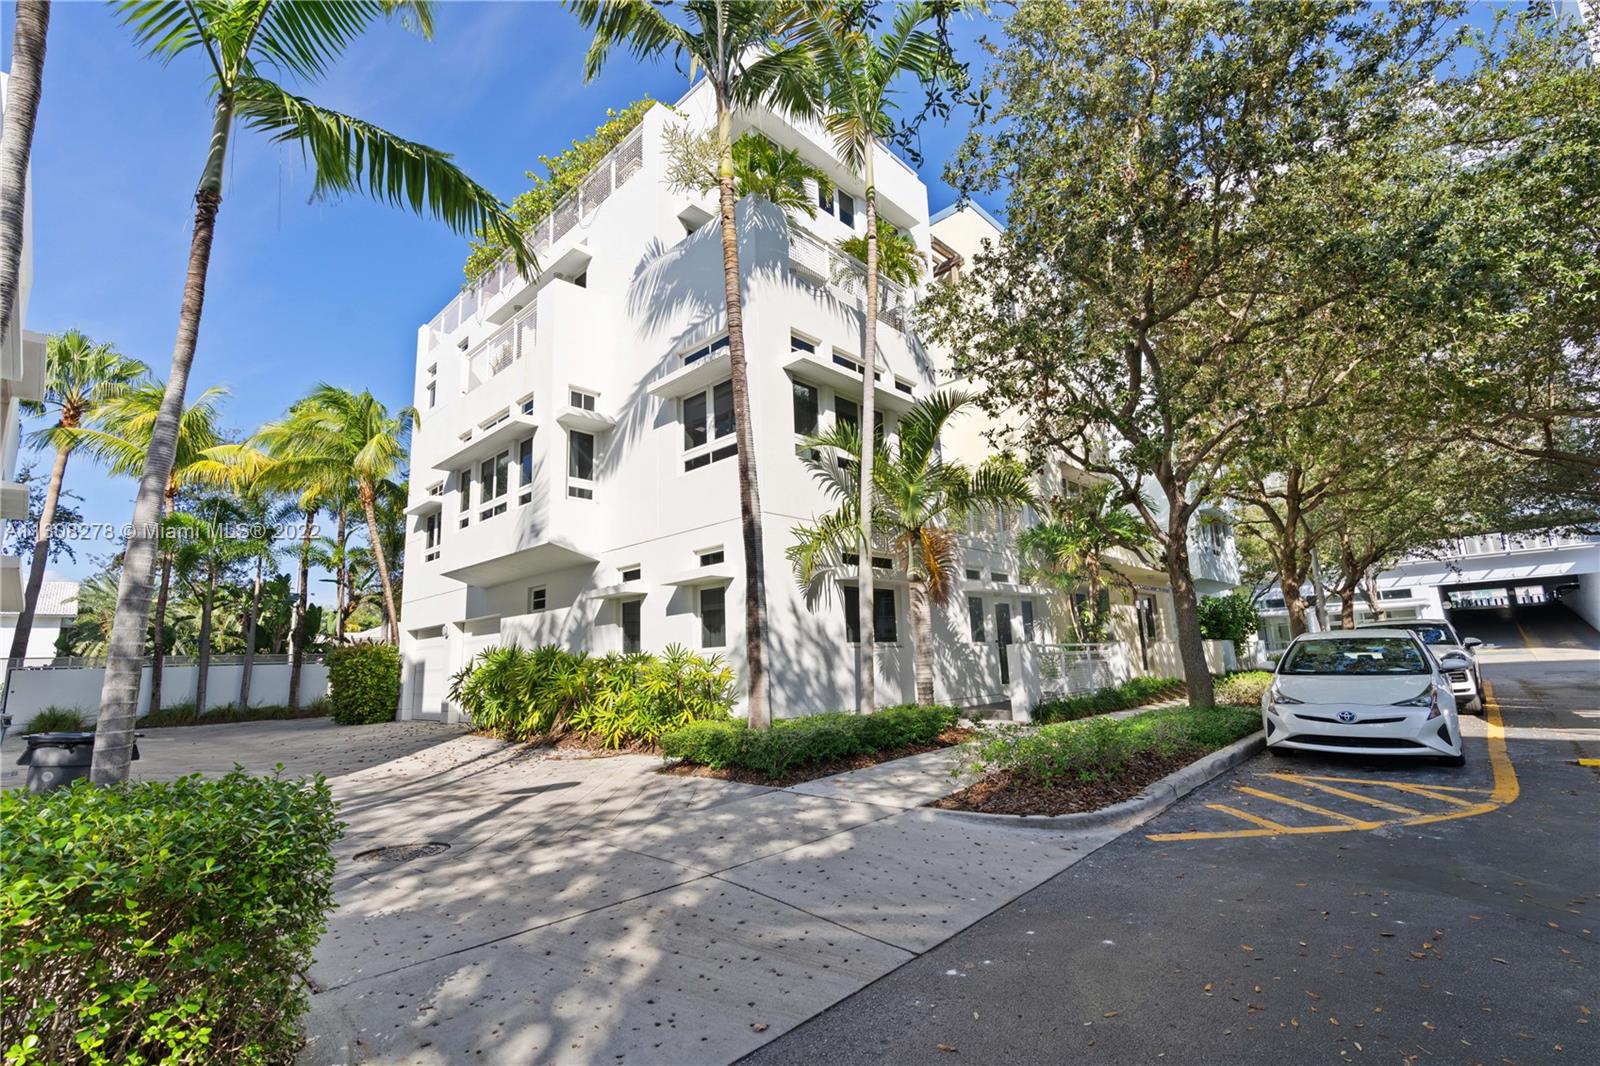 Back on the market! Priced to sell at the Aqua residences private island community. This ultra luxury 4 Story home offers a private elevator, 3 Bed room + home office , and 2 car garage.  Aprox 4000 SF of living area and large terrace. Serenity and tranquility in one of the most exclusive gated communities in Miami Beach. Top of the line finishes throughout, high ceilings and “ Hampton esque design”. The island features 24 hour security, full service concierge, two pools, state of the art gym, steam room/ sauna and much more.  Advance notice required for showings.